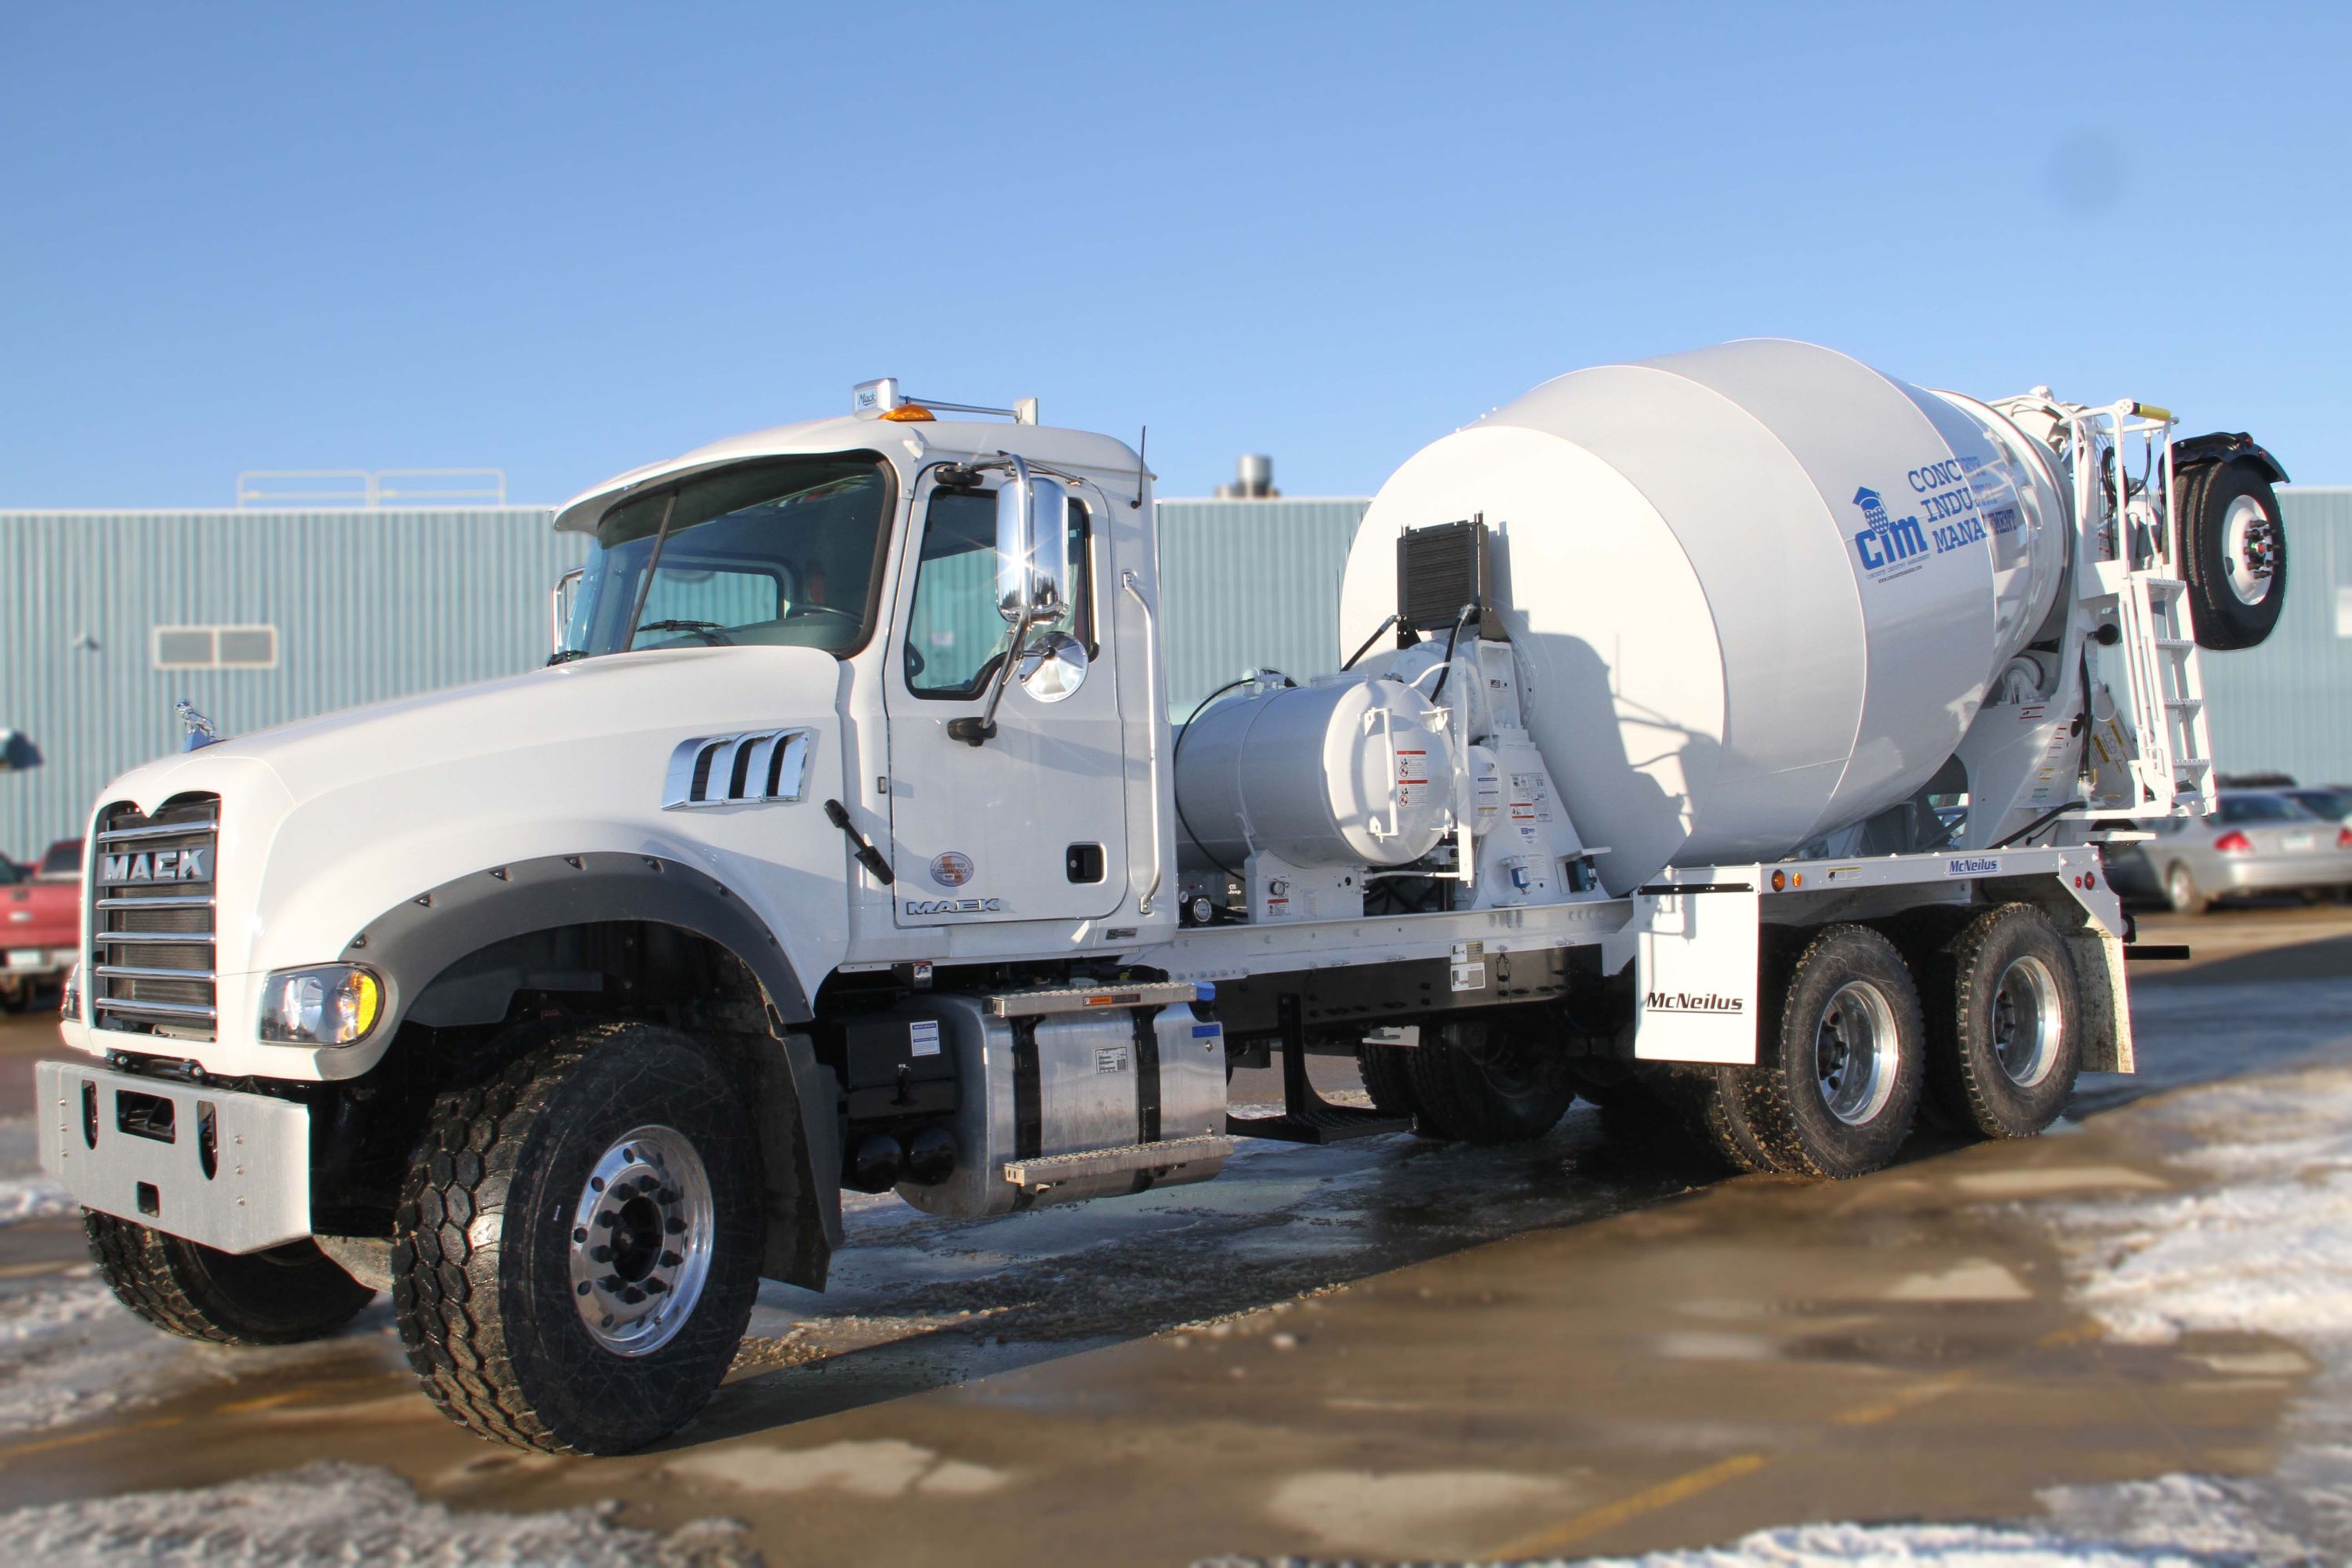 signature item for their annual auction at World of Concrete is a Mack Granite Axle Forward model mounted with a McNeilus 11-cubic-yard Bridgemaster concrete transit mixer, donated by Mack Trucks, Inc. and McNeilus Co., a division of Oshkosh Truck.